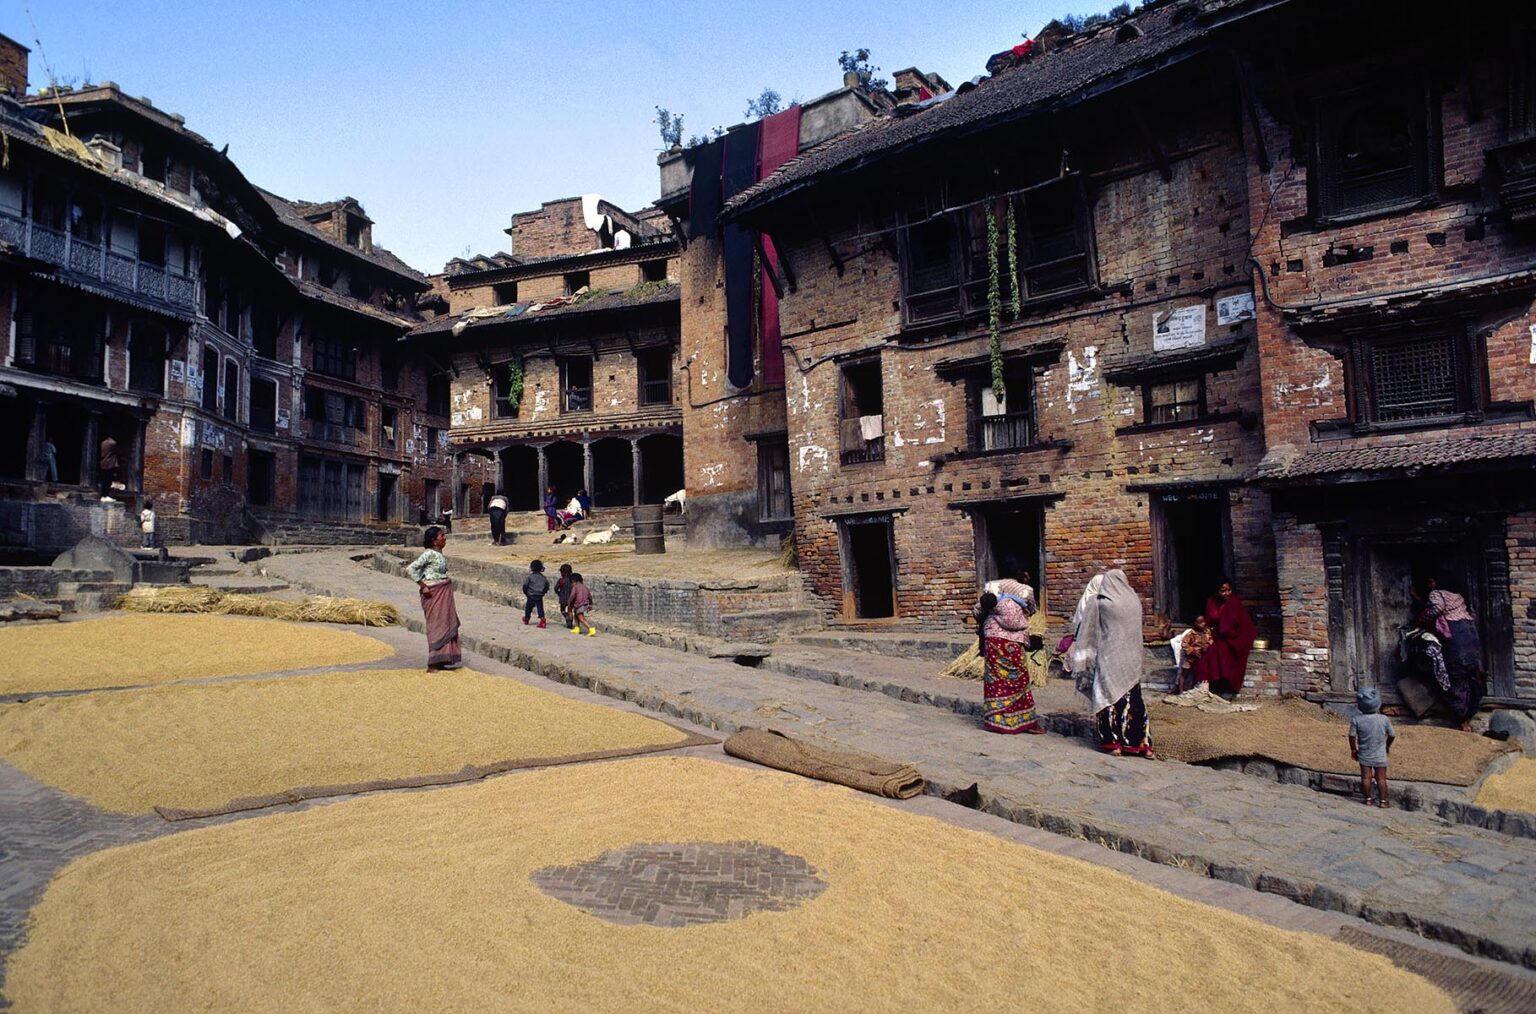 RICE, the mainstay of the Nepali diet, is dried in an open courtyard - BHAKTAPUR, NEPAL